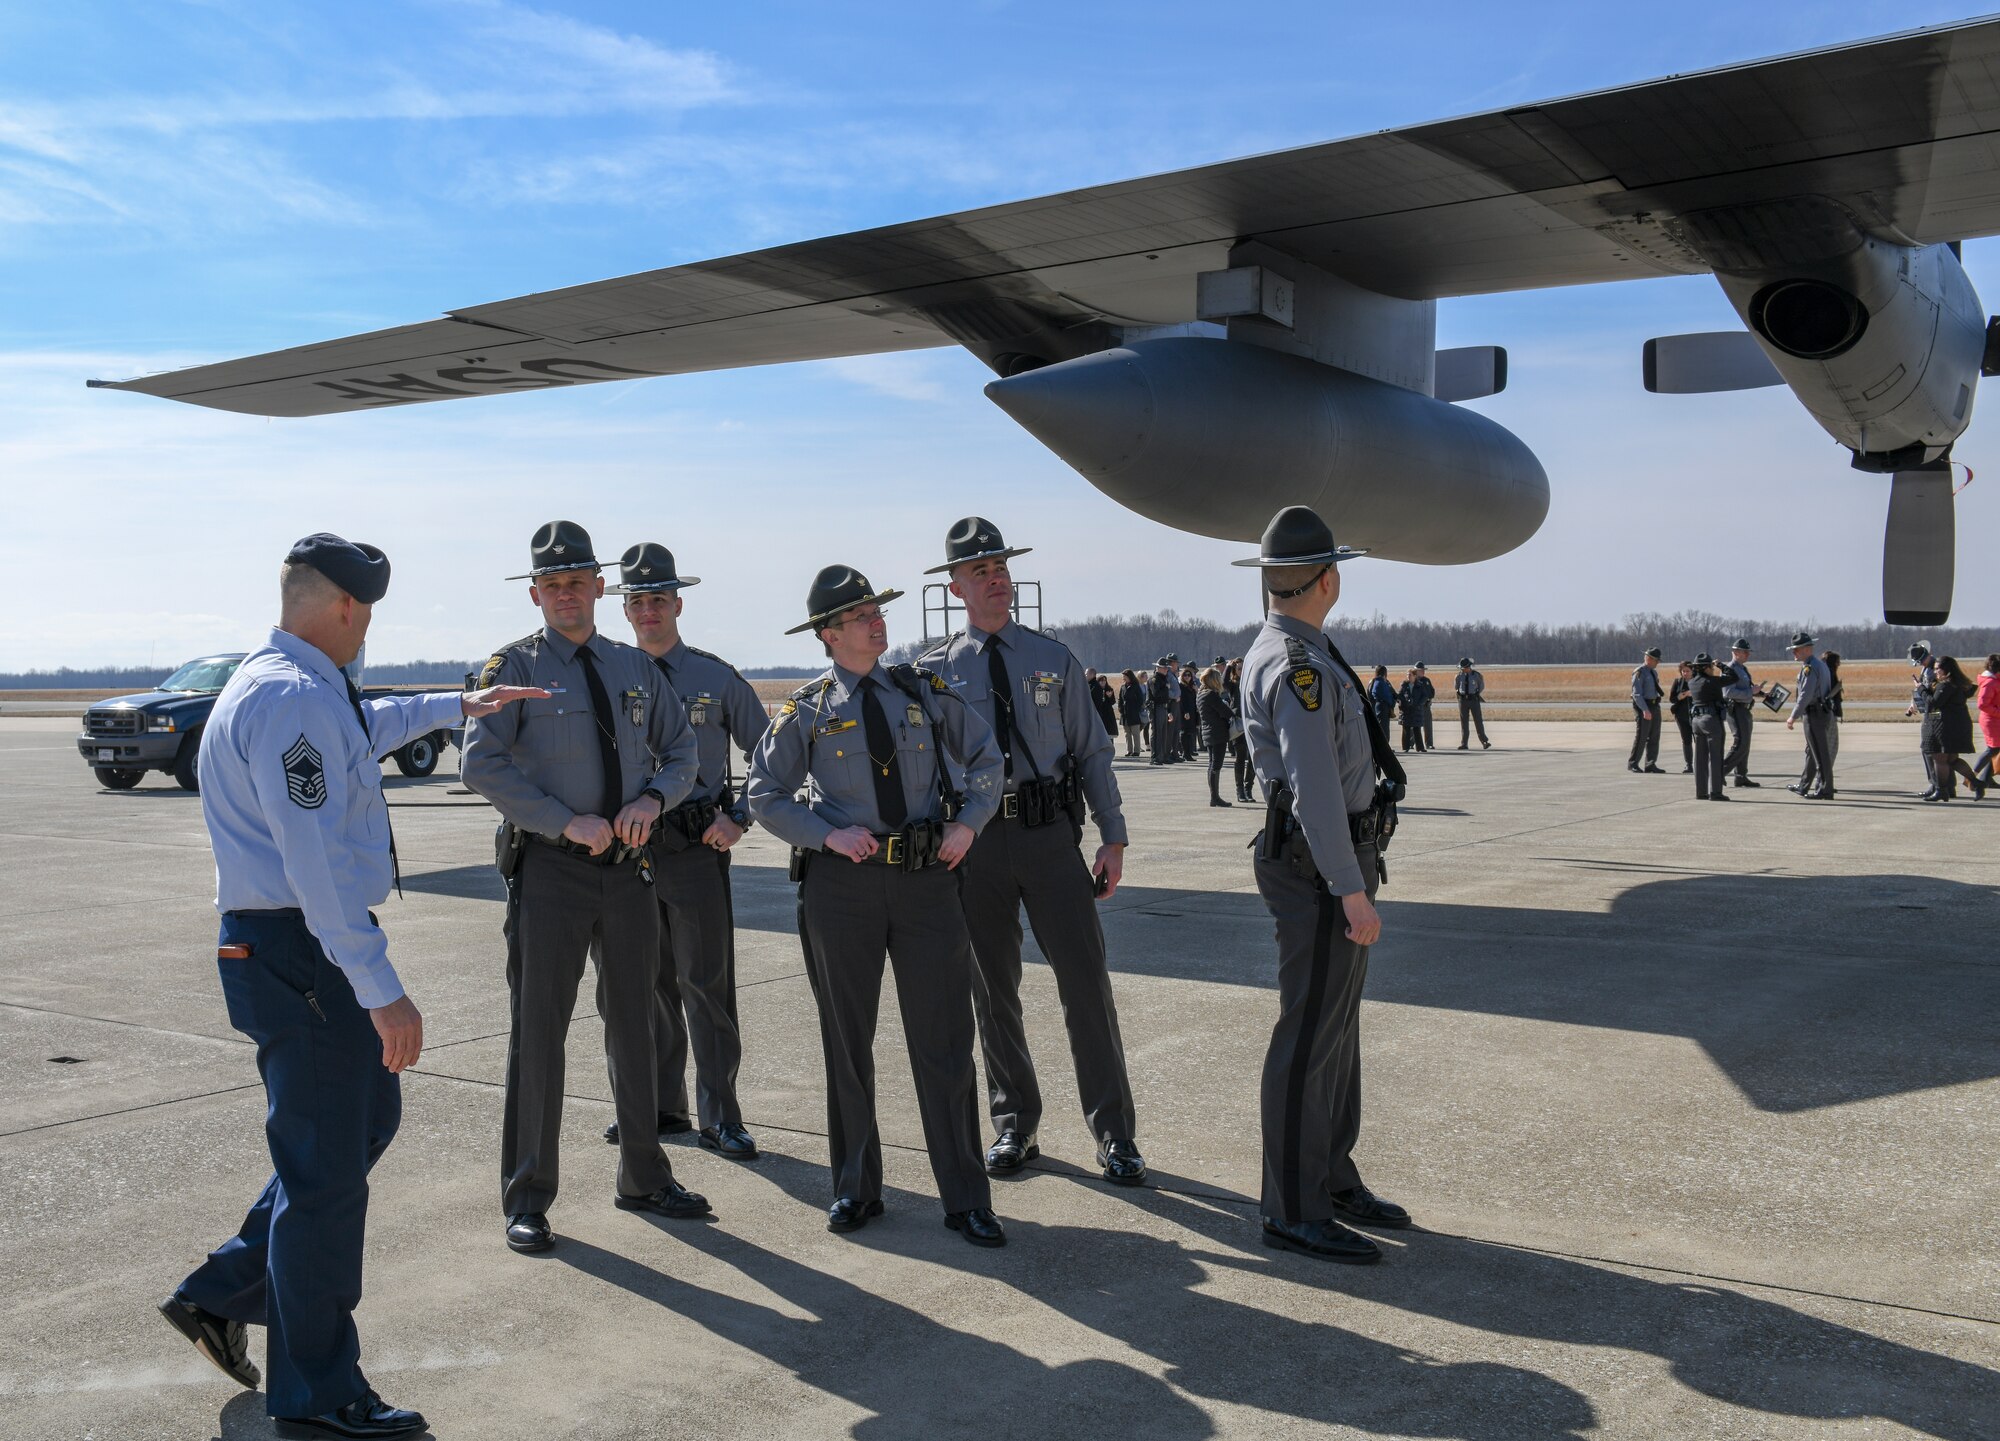 Chief Master Sgt. Les D. Brode, security forces manager with the 910th Security Forces Squadron and employee of the Ohio State Highway patrol, explains various functions of the C-130H Hercules aircraft to members of the OSHP on the flight line here, March 1, 2019.